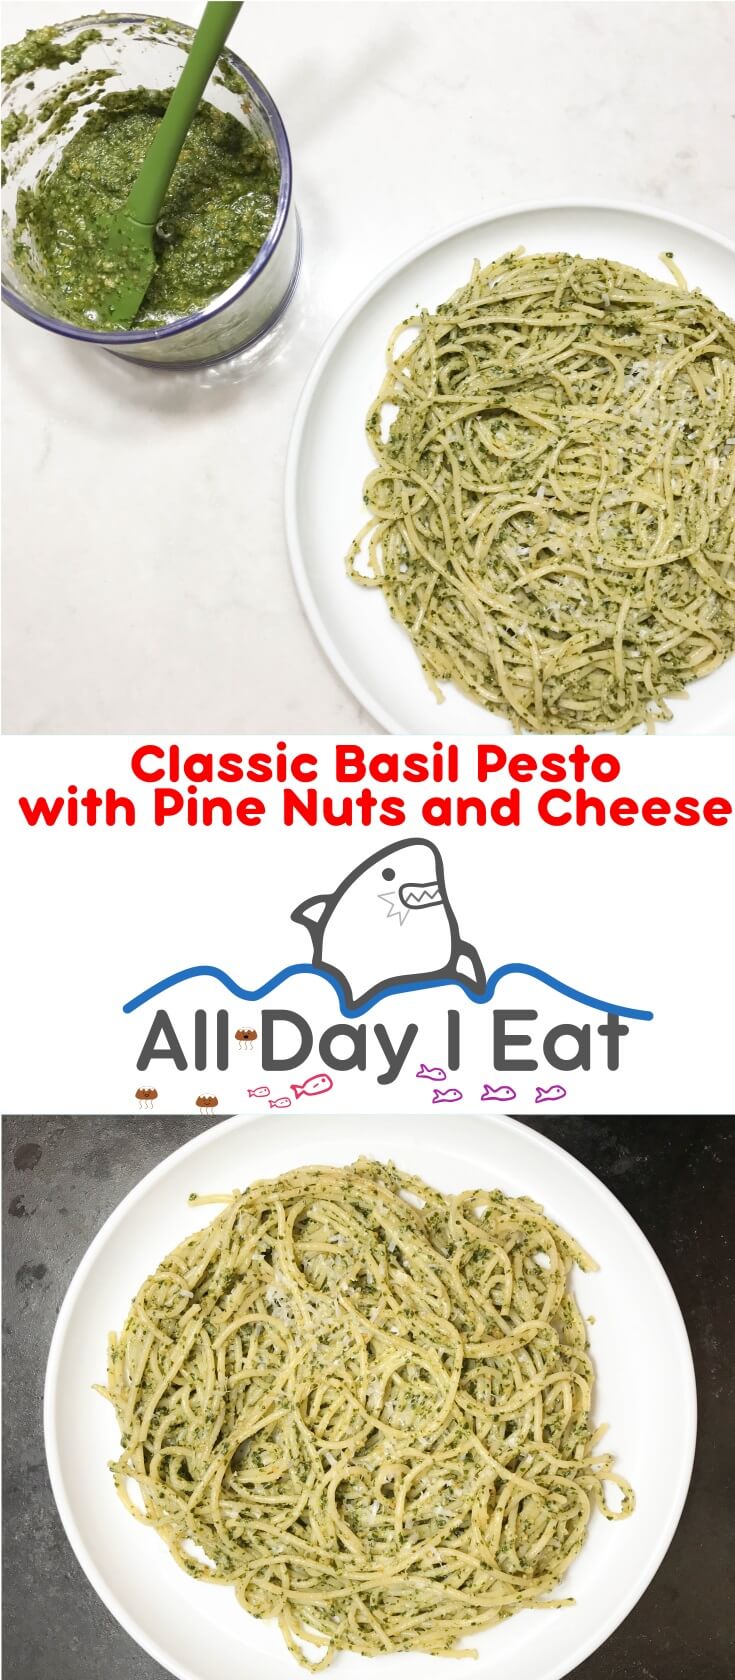 Classic Basil Pesto with Pine Nuts and Cheese. I made this with my Aerogarden grown hydroponic Sweet Italian Basil! It was one of the best I've ever tasted you have to try it!!! | www.alldayieat.com